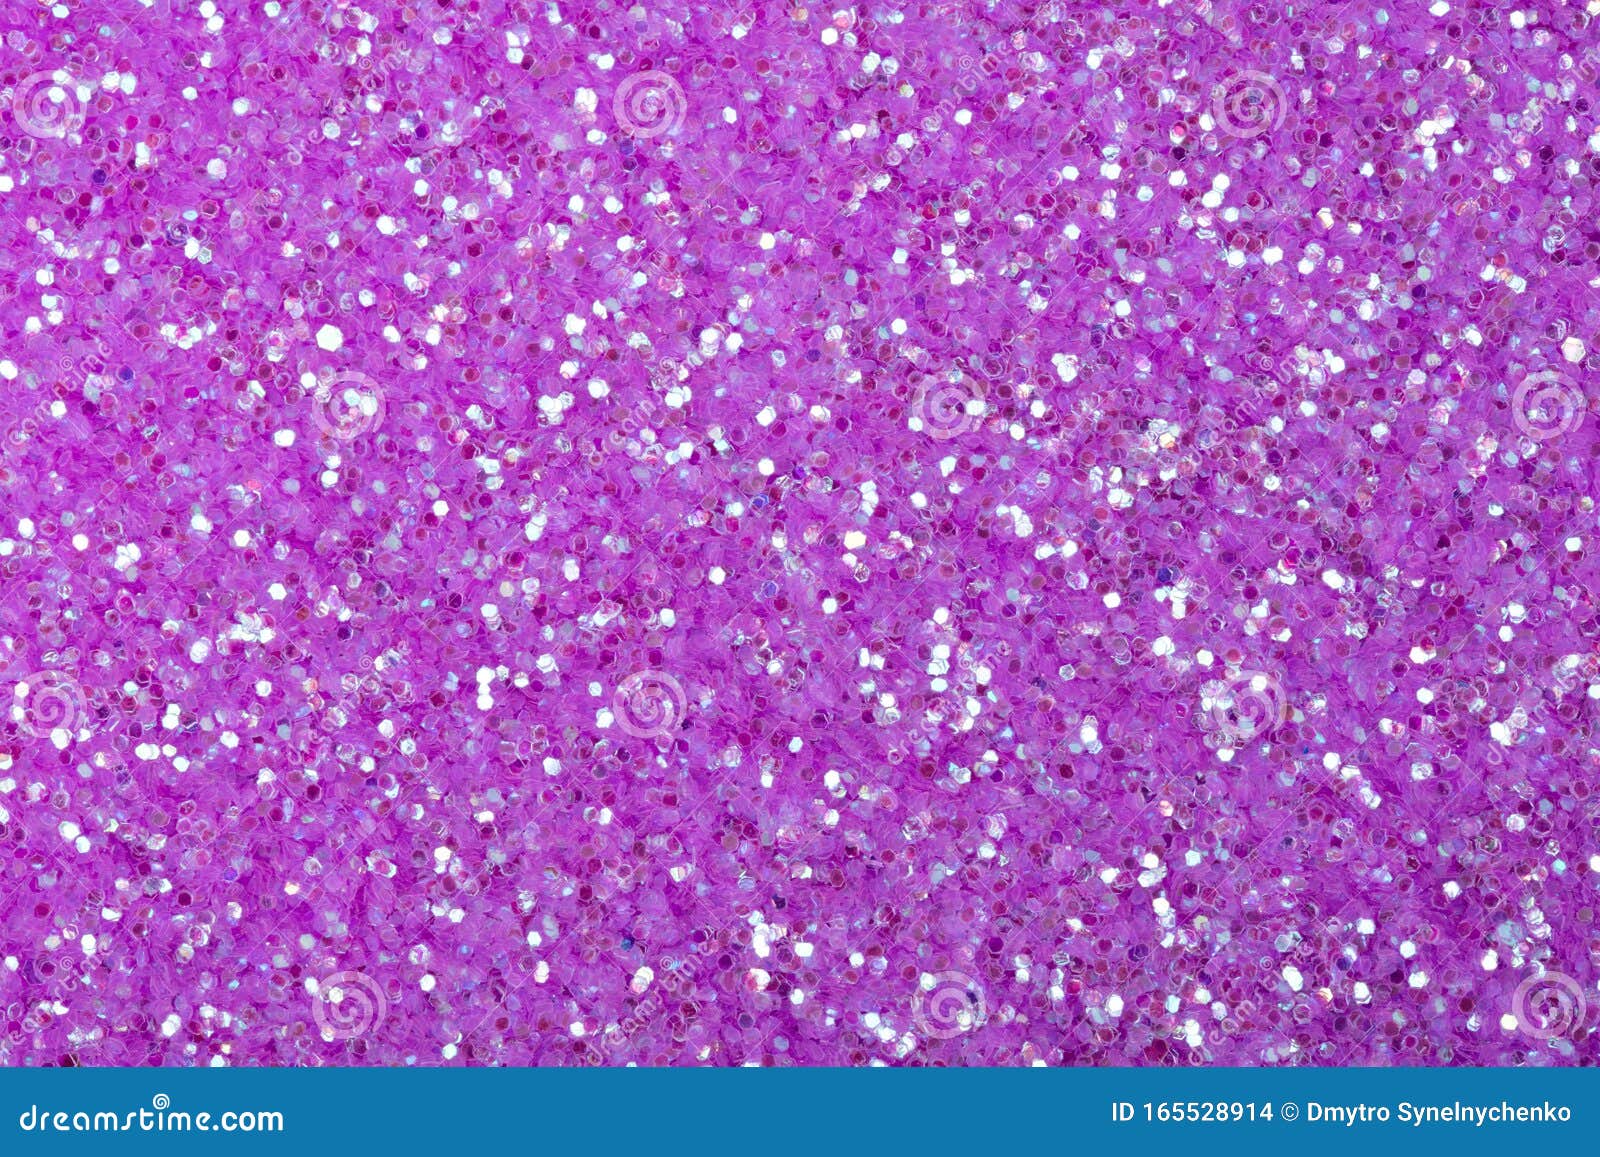 Shiny Light Violet Glitter Background As Part of Your Personal Project Work.  Stock Photo - Image of shimmer, elegant: 165528914